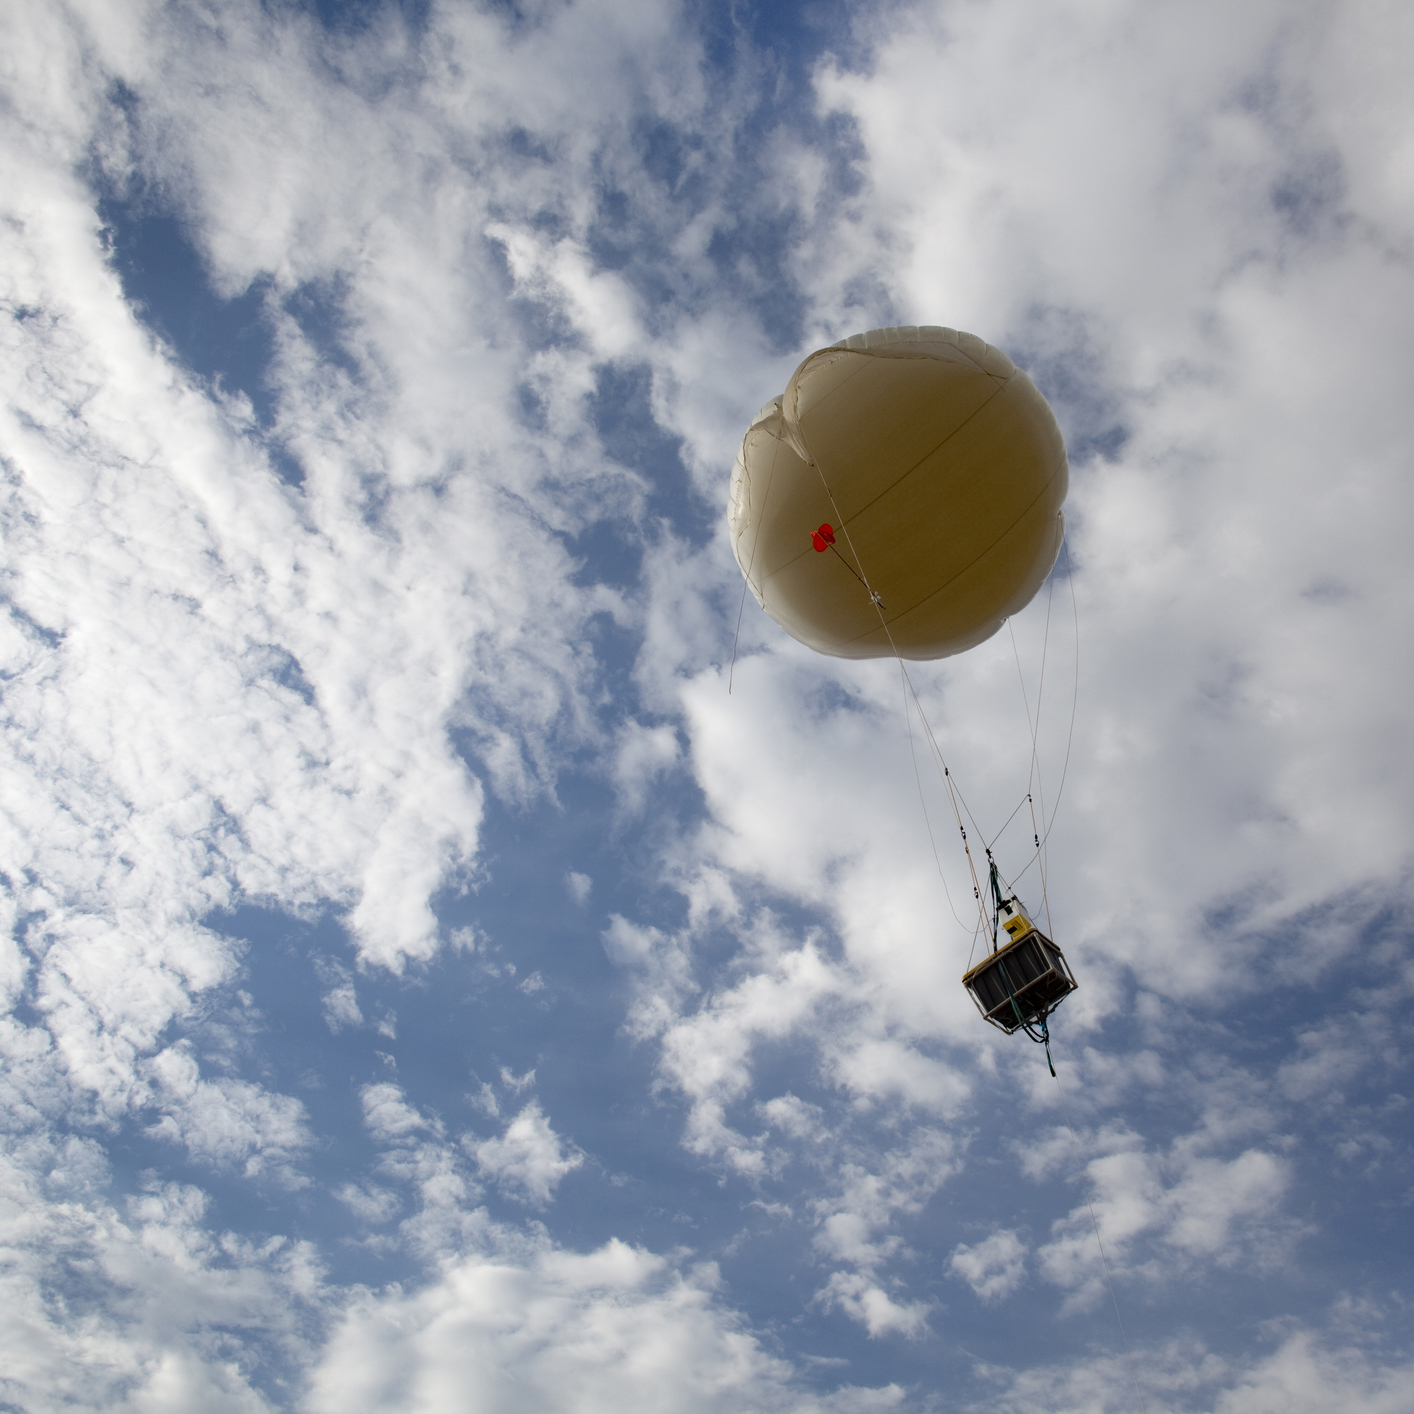 Weather balloon launch. Photo Credit: Getty Images.